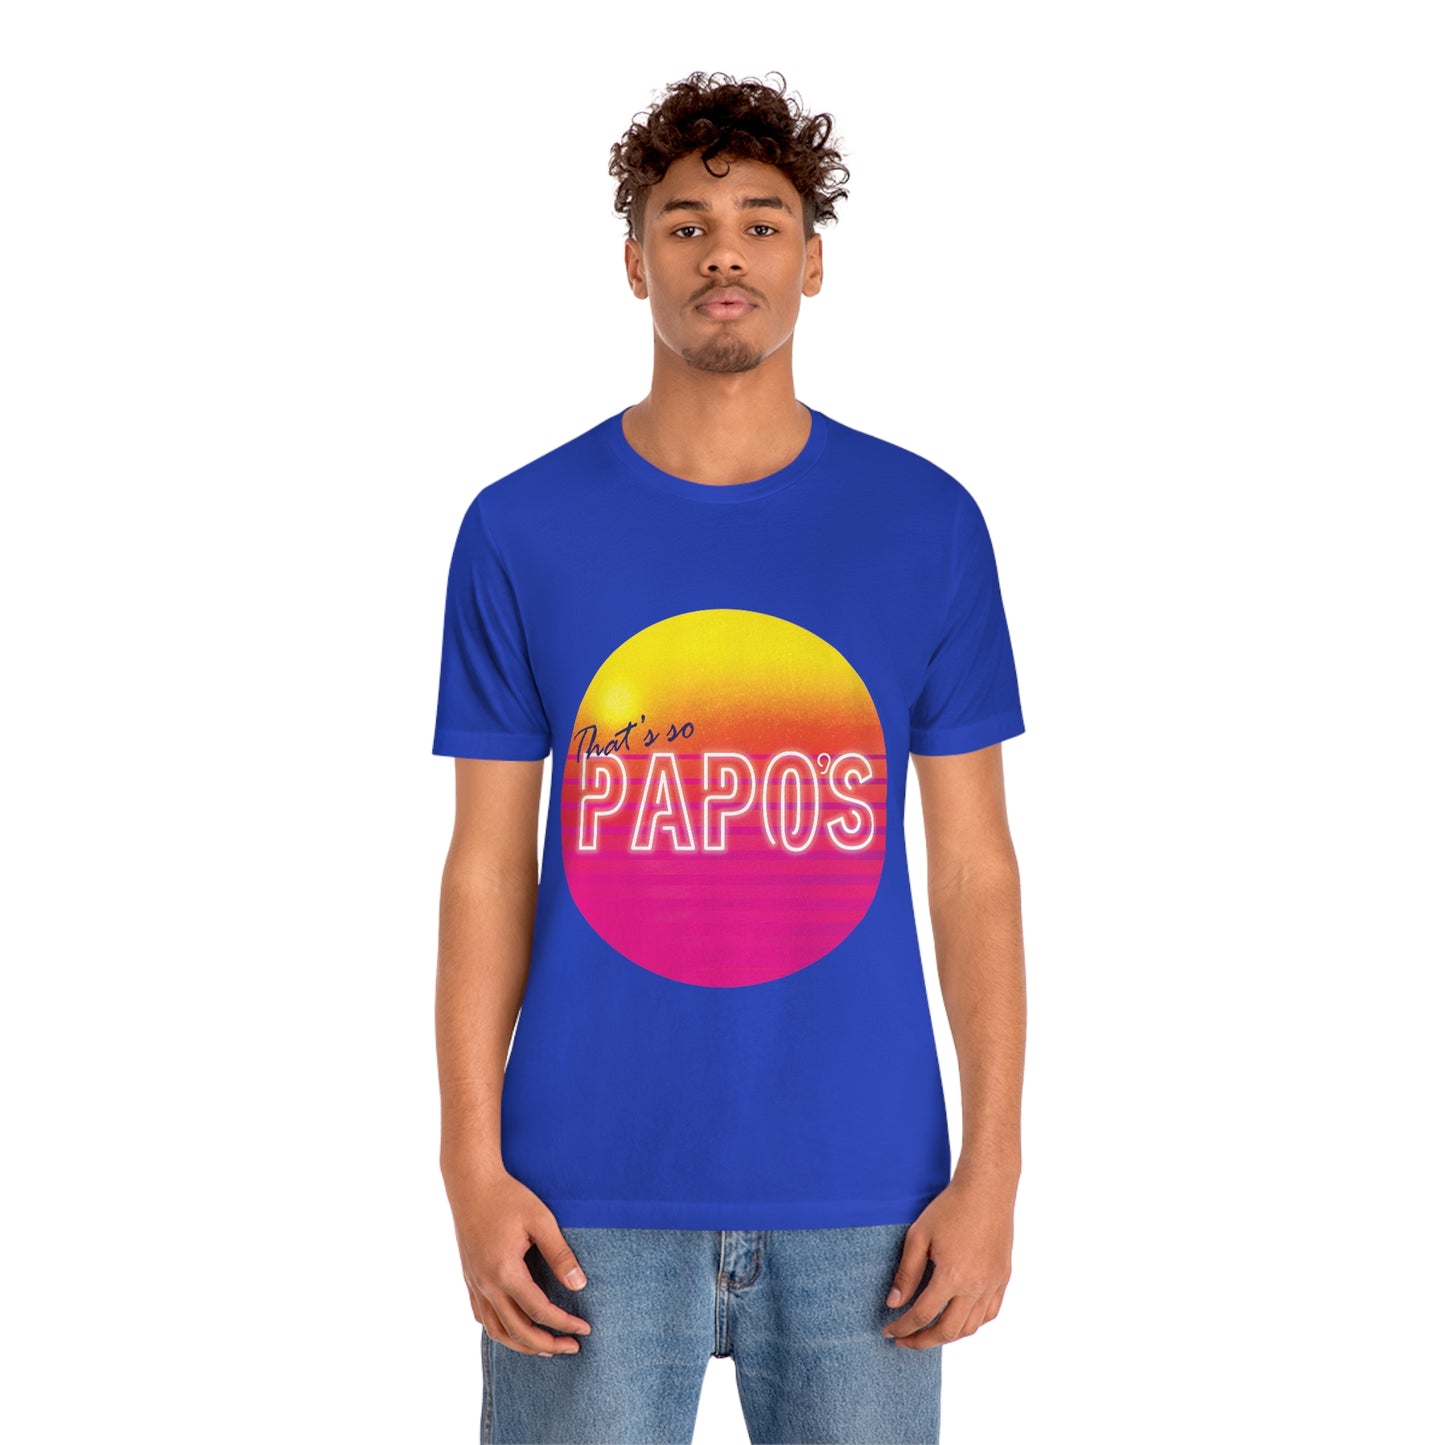 That's So PaPo's Front Logo Unisex Jersey Short Sleeve Tee